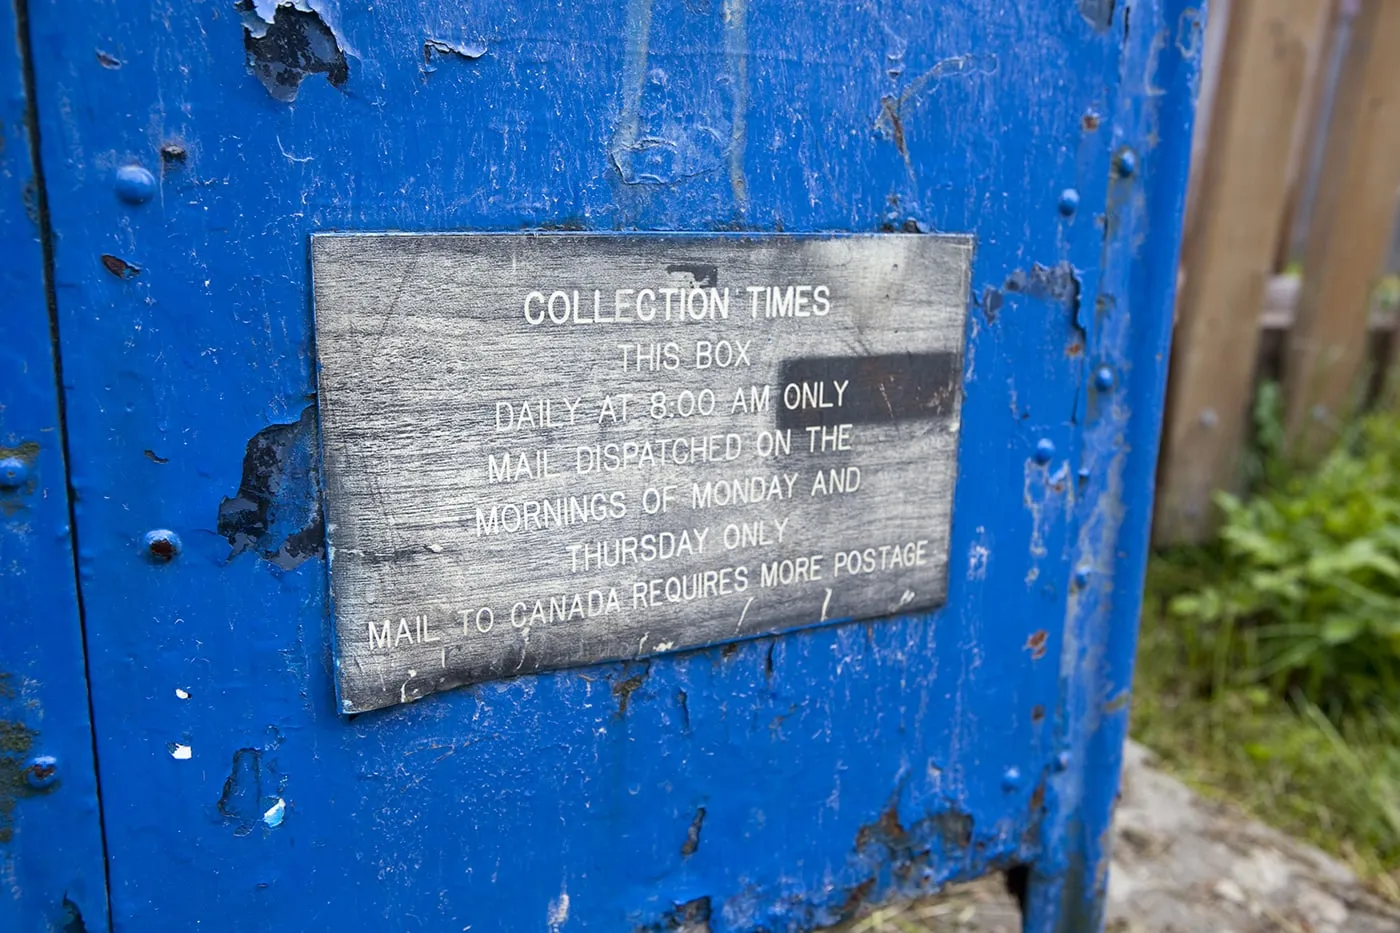 Hyder, Alaska Post Office collection times.